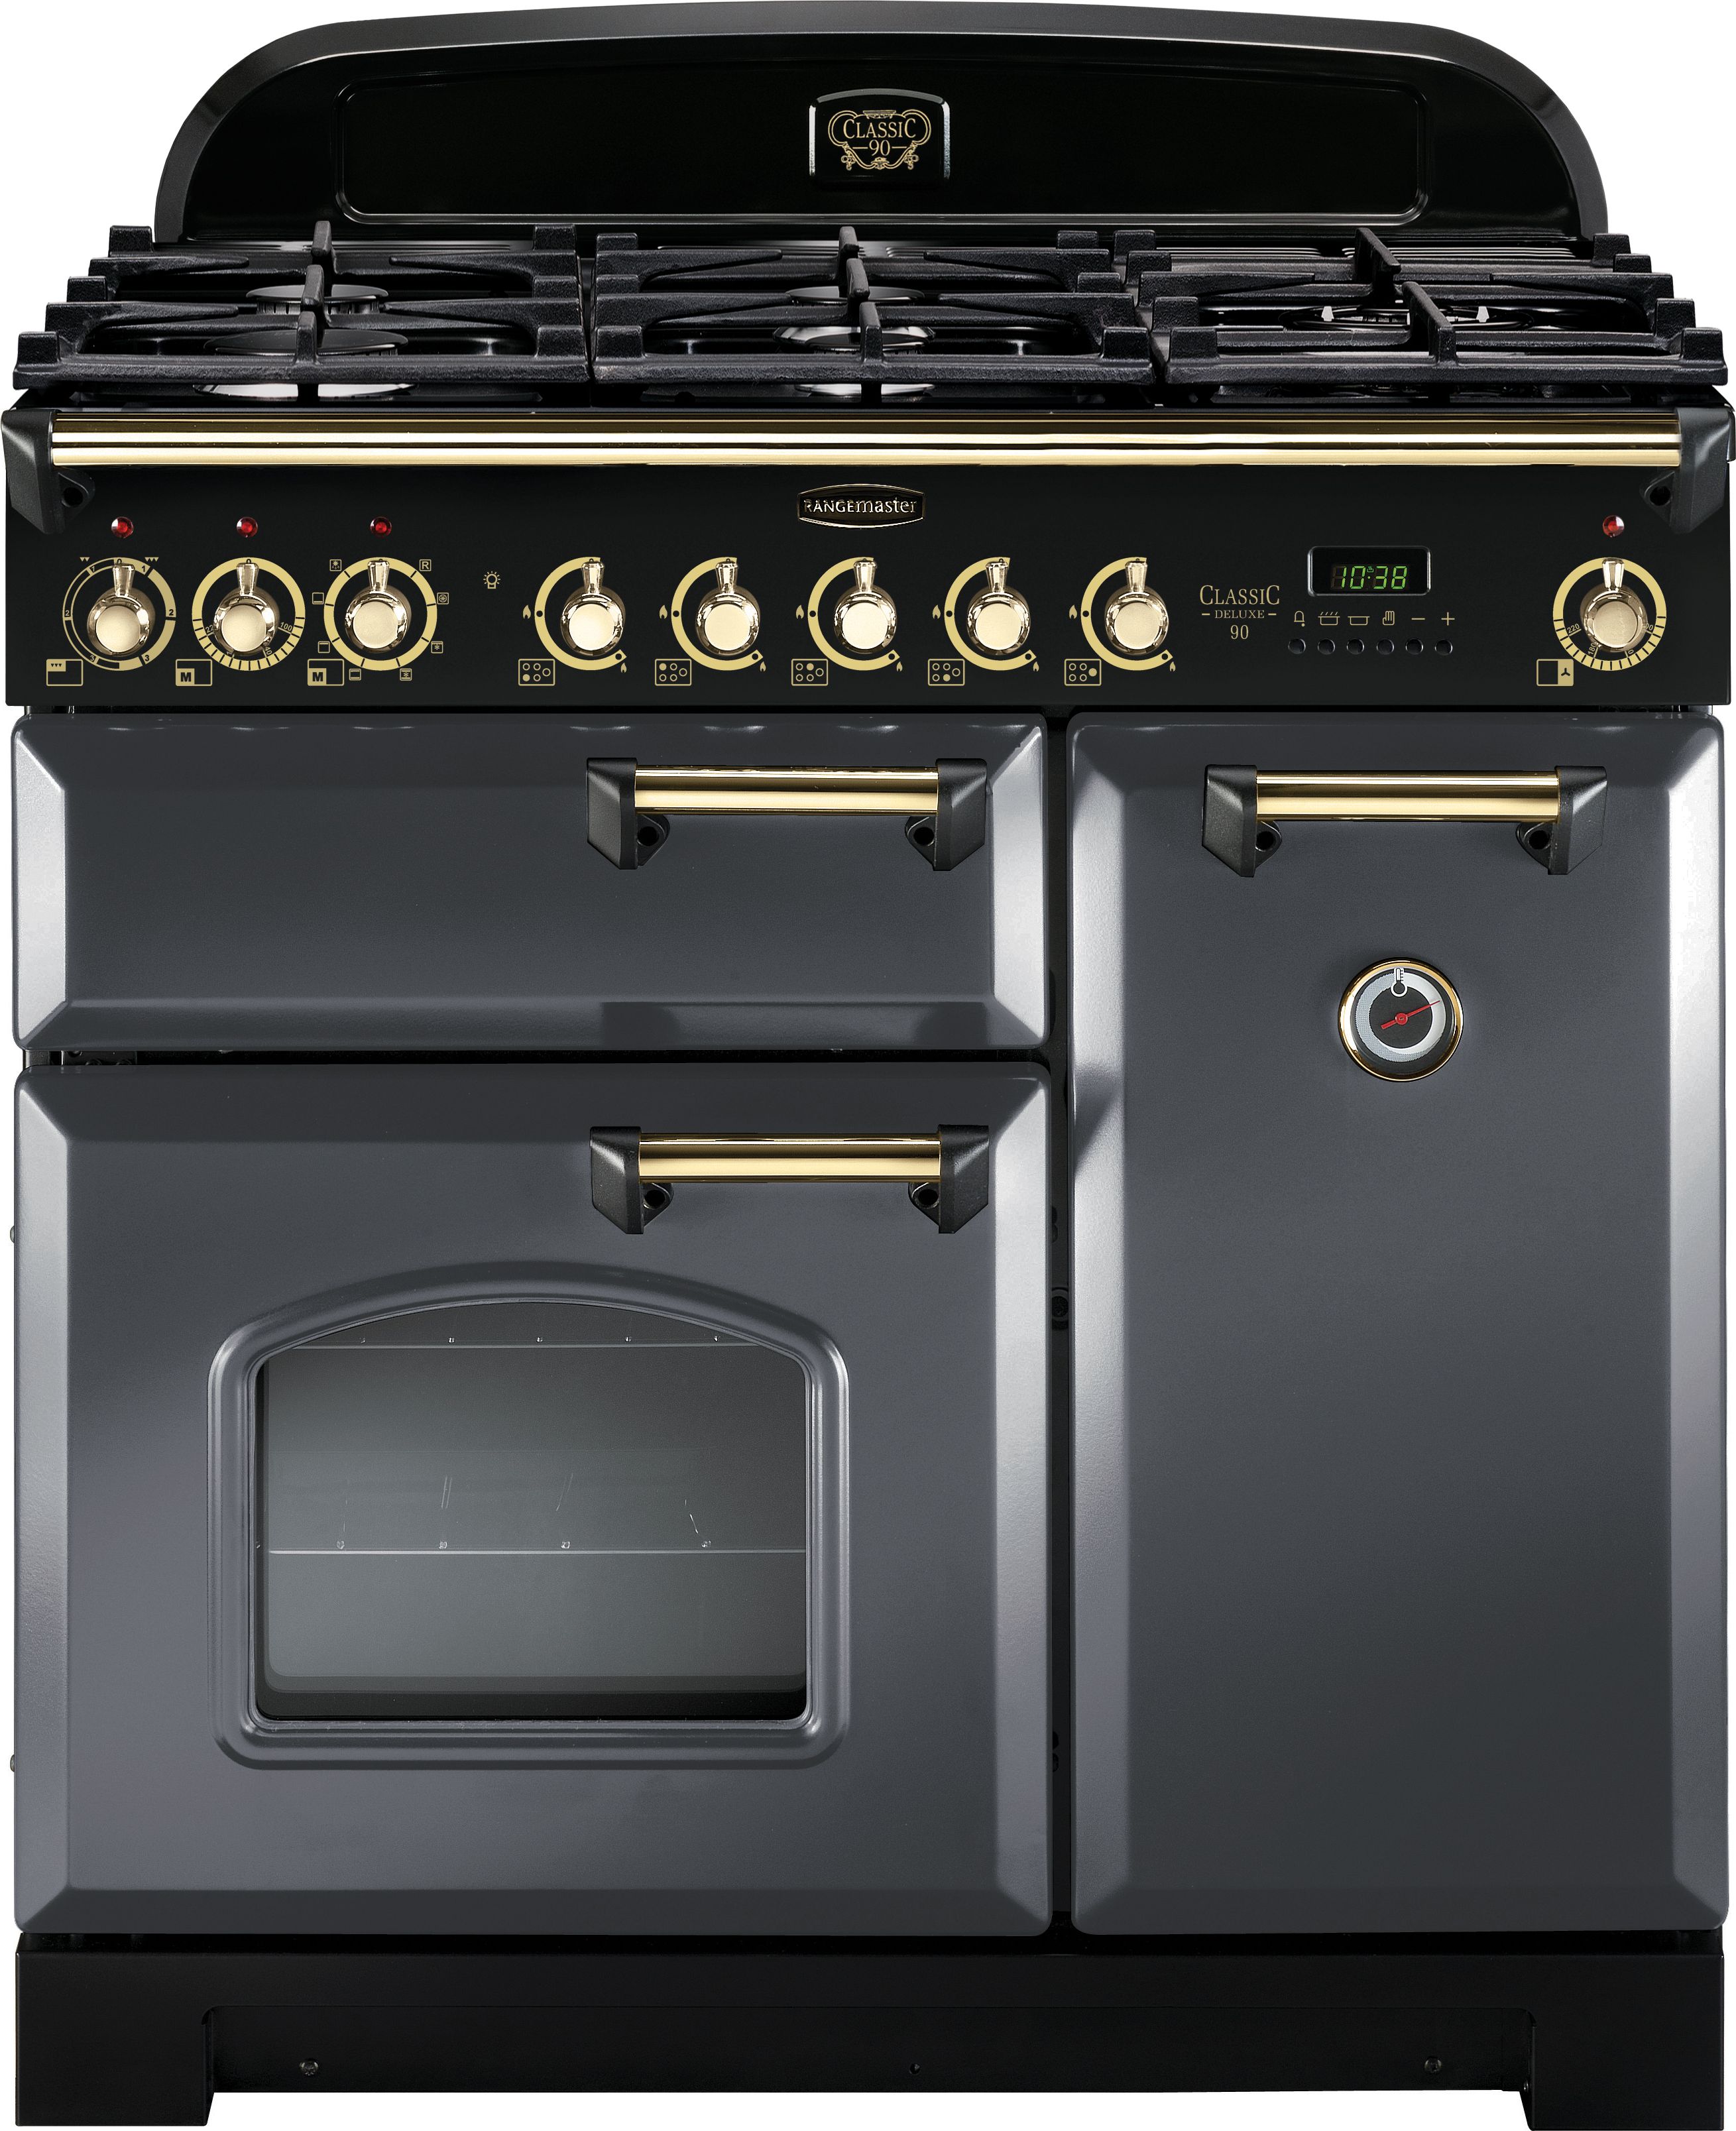 Rangemaster Classic Deluxe CDL90DFFSL/B 90cm Dual Fuel Range Cooker - Slate Grey / Brass - A/A Rated, Grey